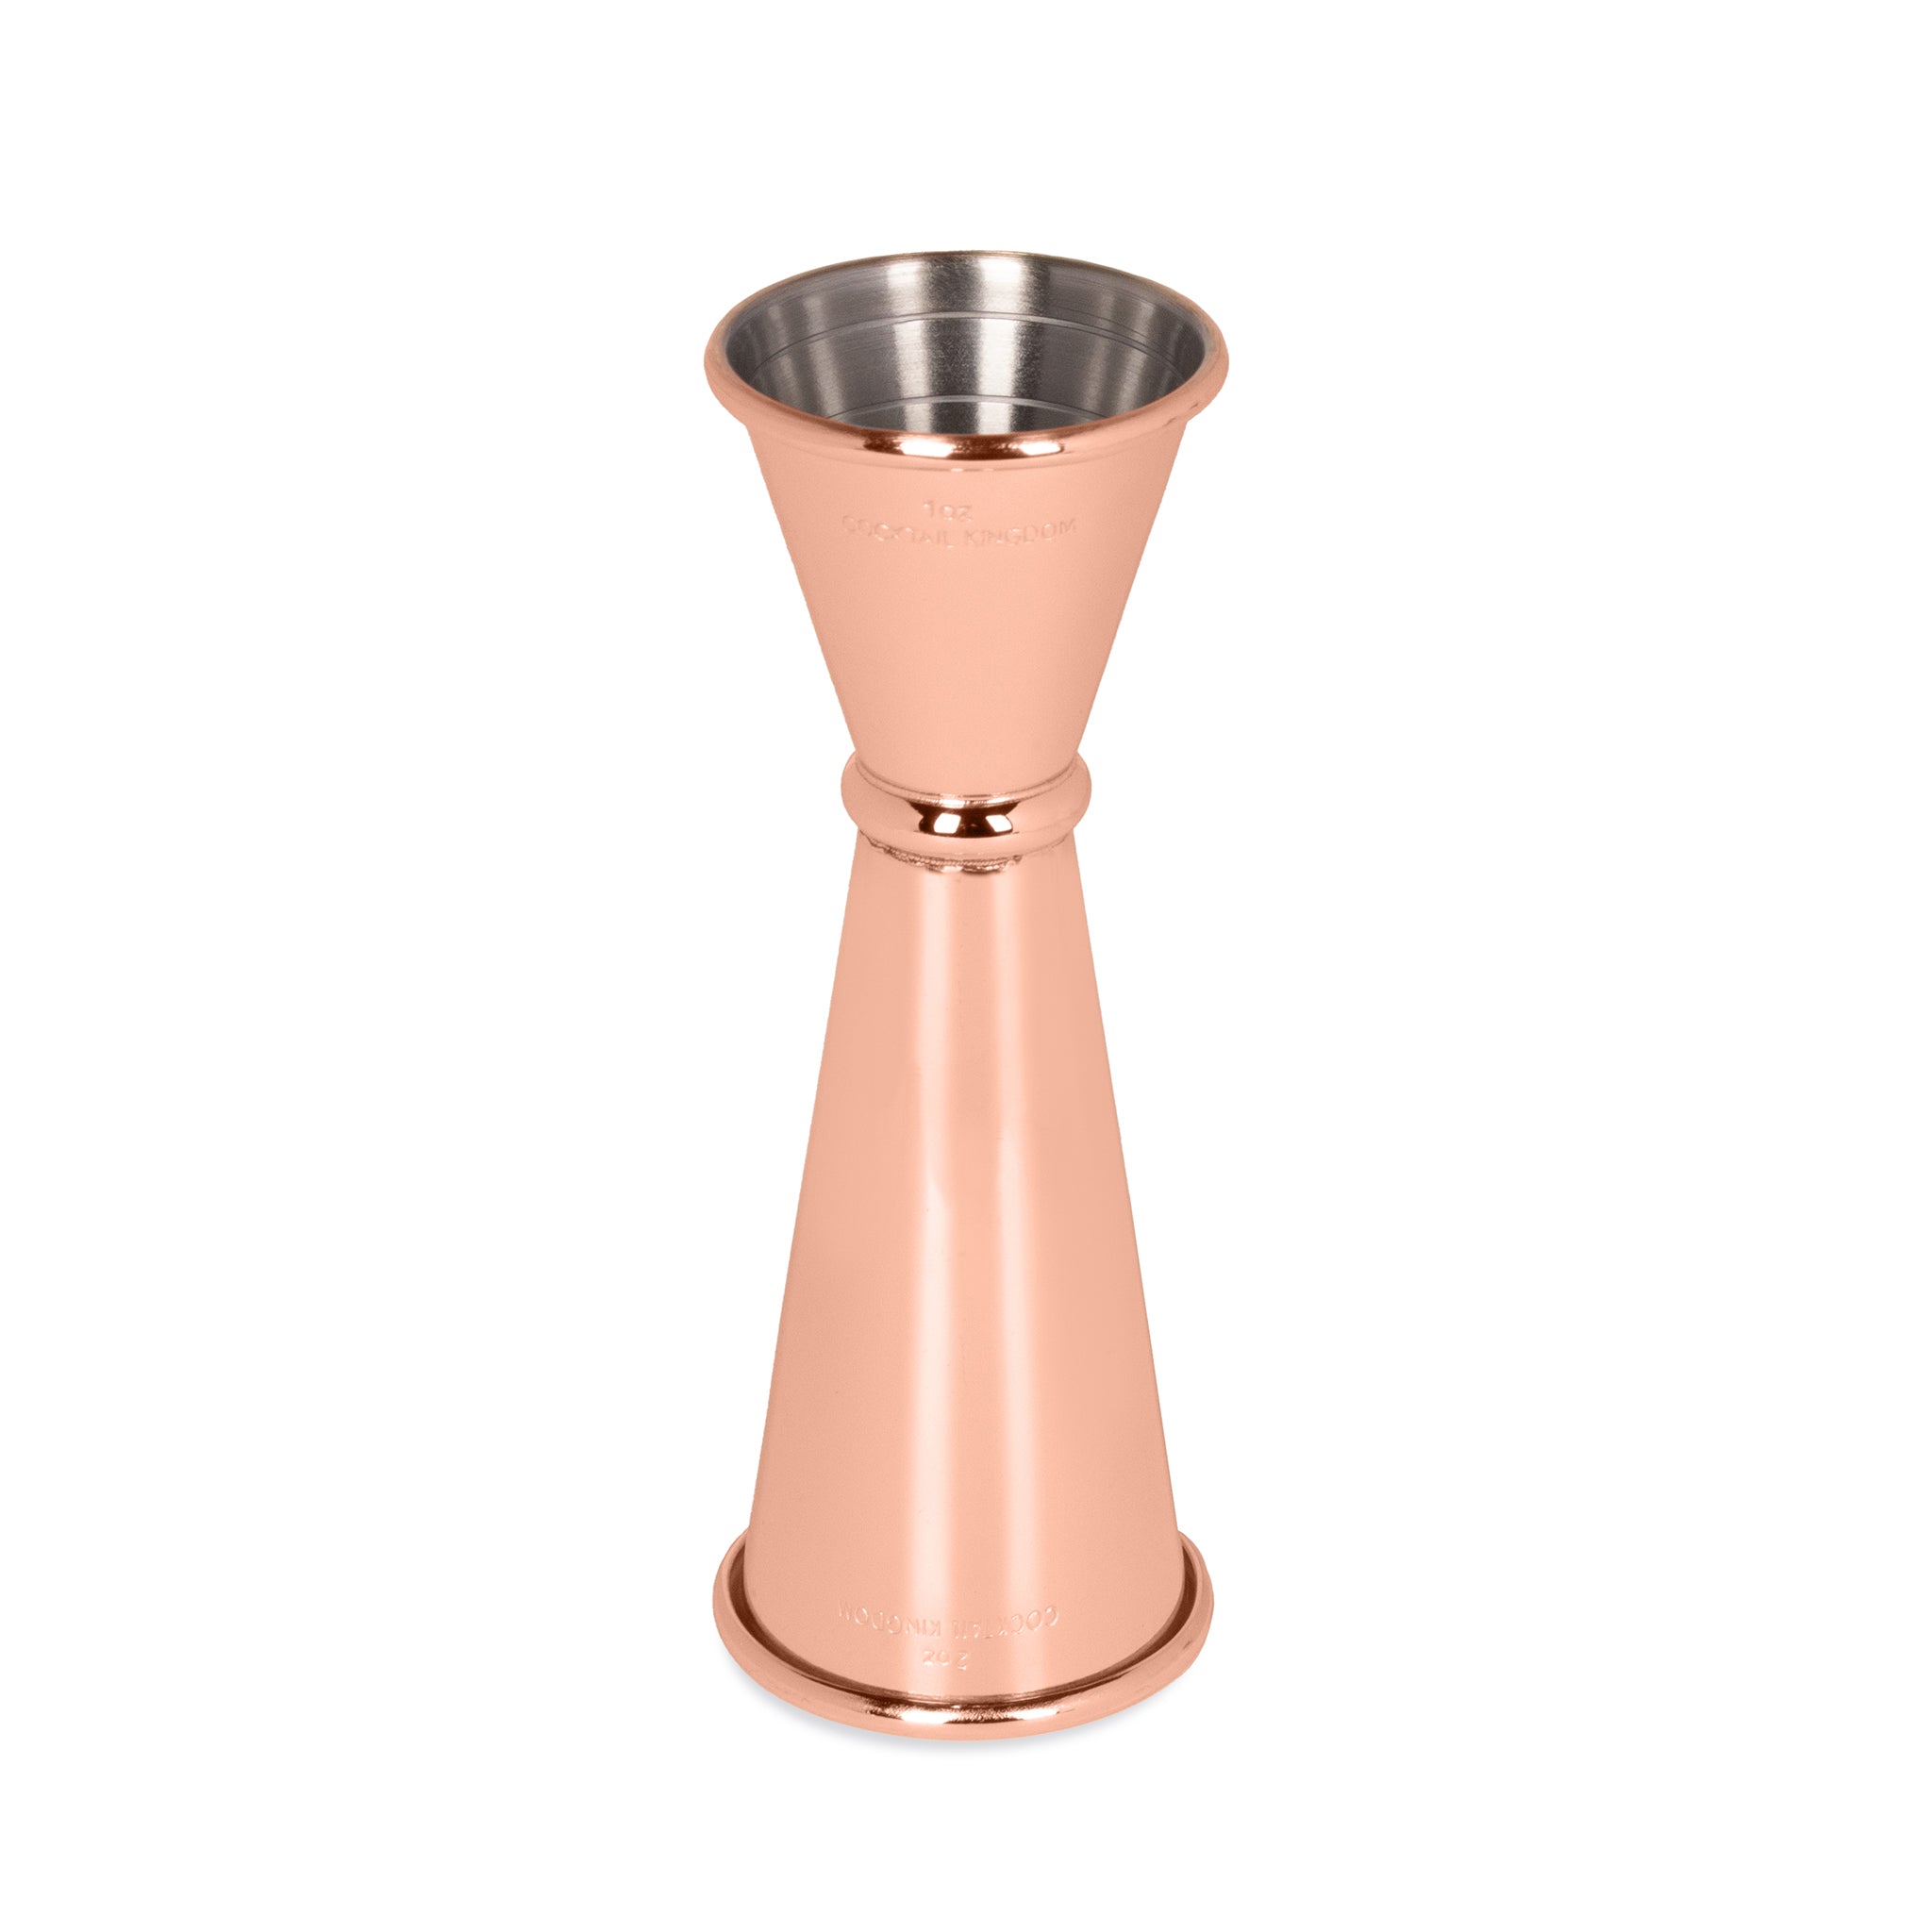 Urban Bar Ginza Japanese Style Cocktail Jigger - Copper Plated